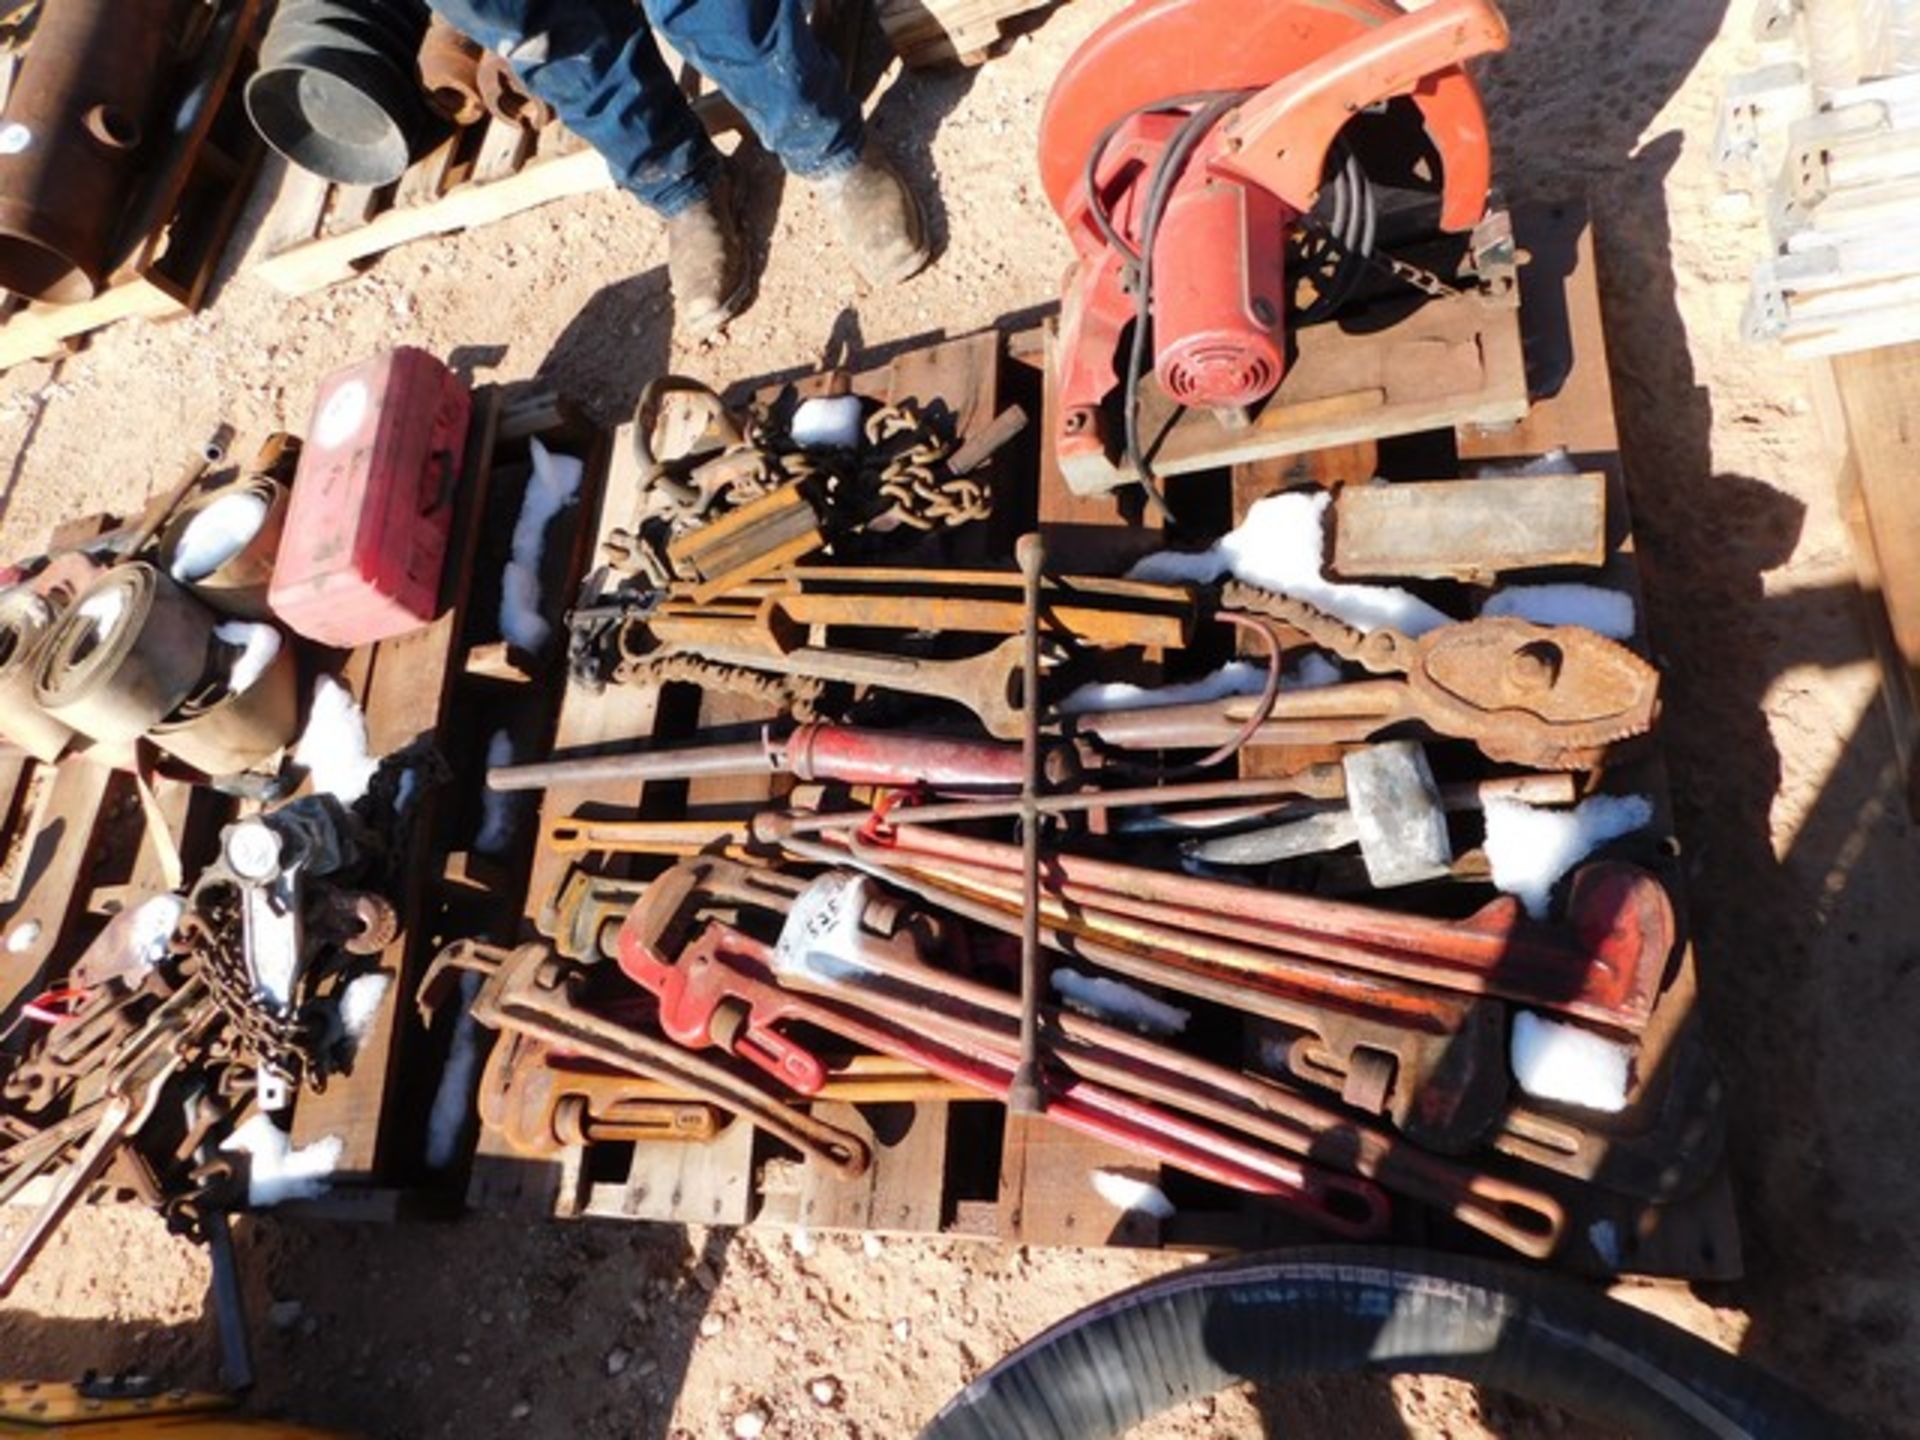 Located in YARD 1 - Midland, TX (1645) 1 PALLET WITH PIPE WRENCHES, MILWAKEE ELE